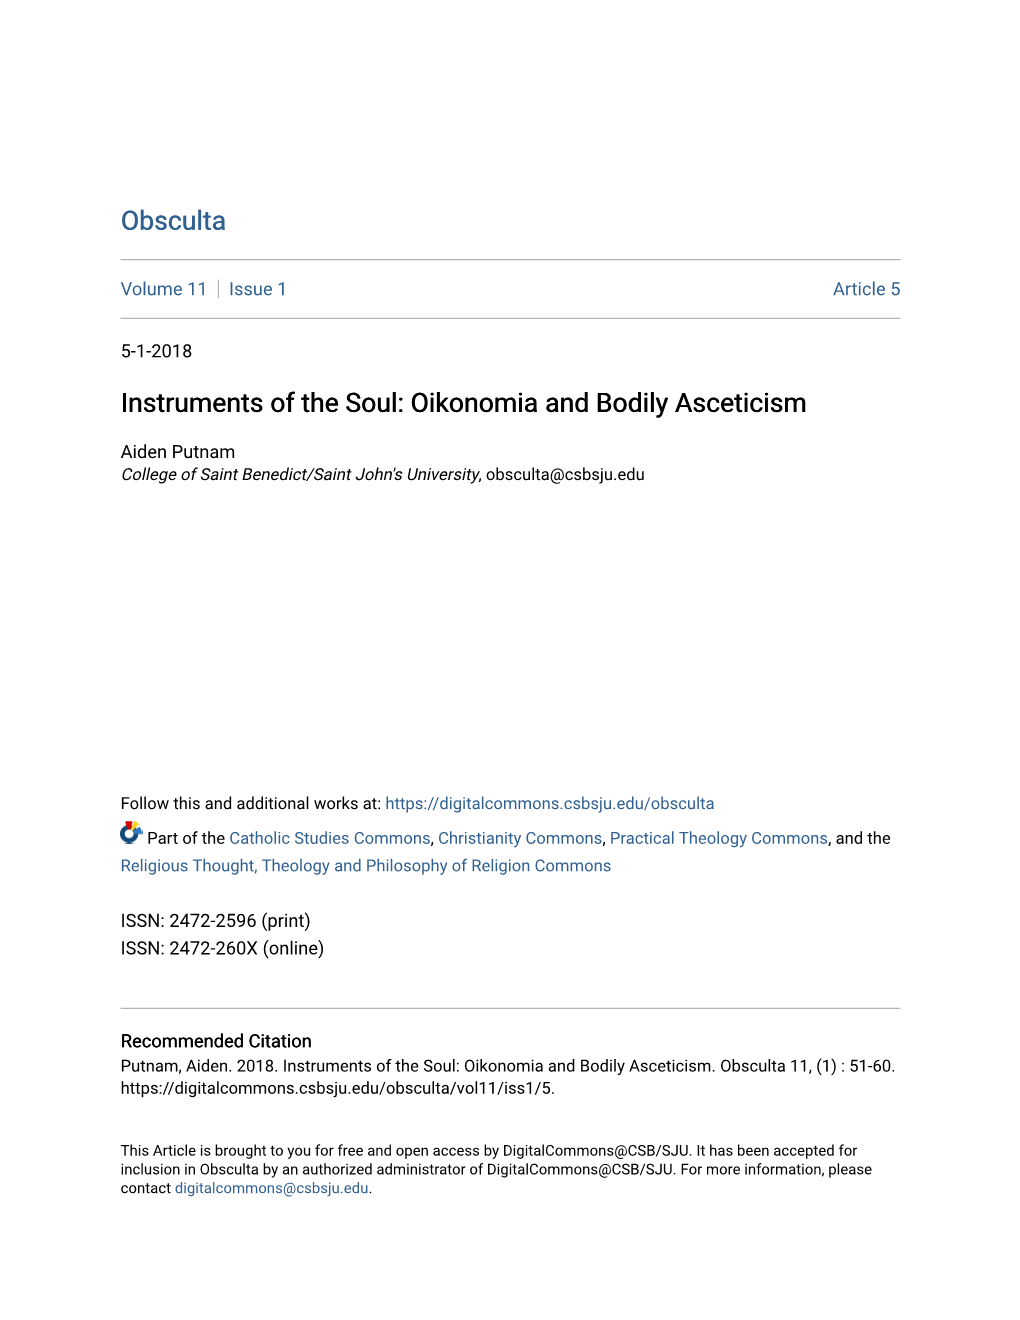 Instruments of the Soul: Oikonomia and Bodily Asceticism